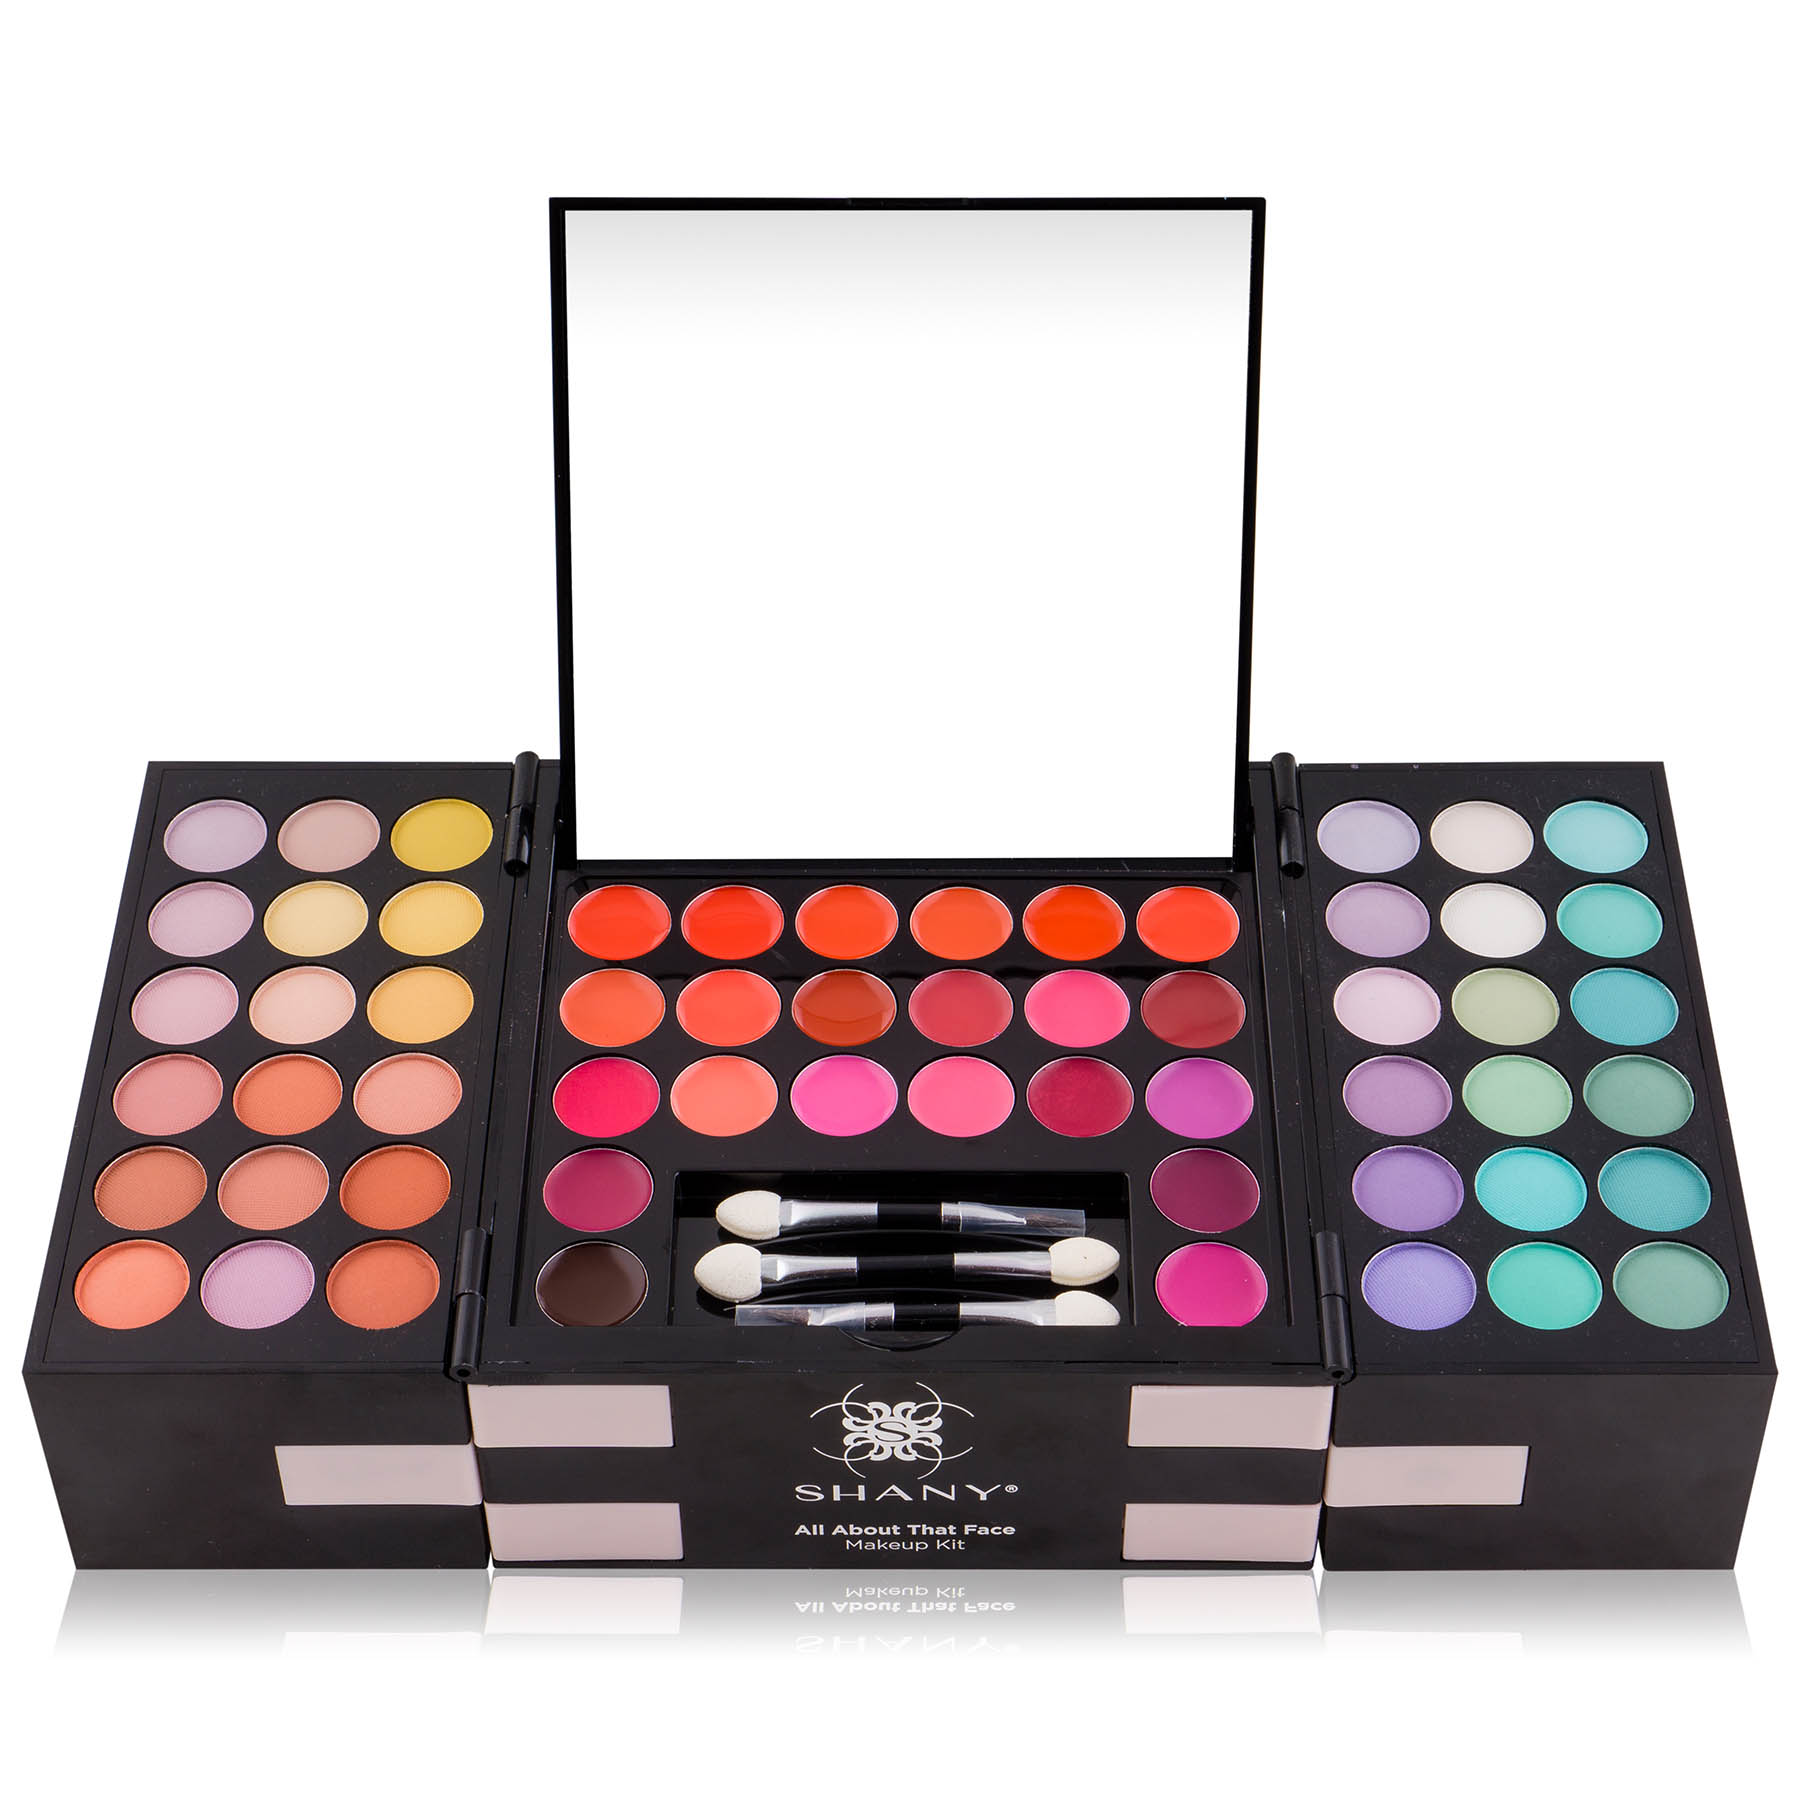 SHANY All About the Face Makeup Kit, 151 pc - Walmart.com